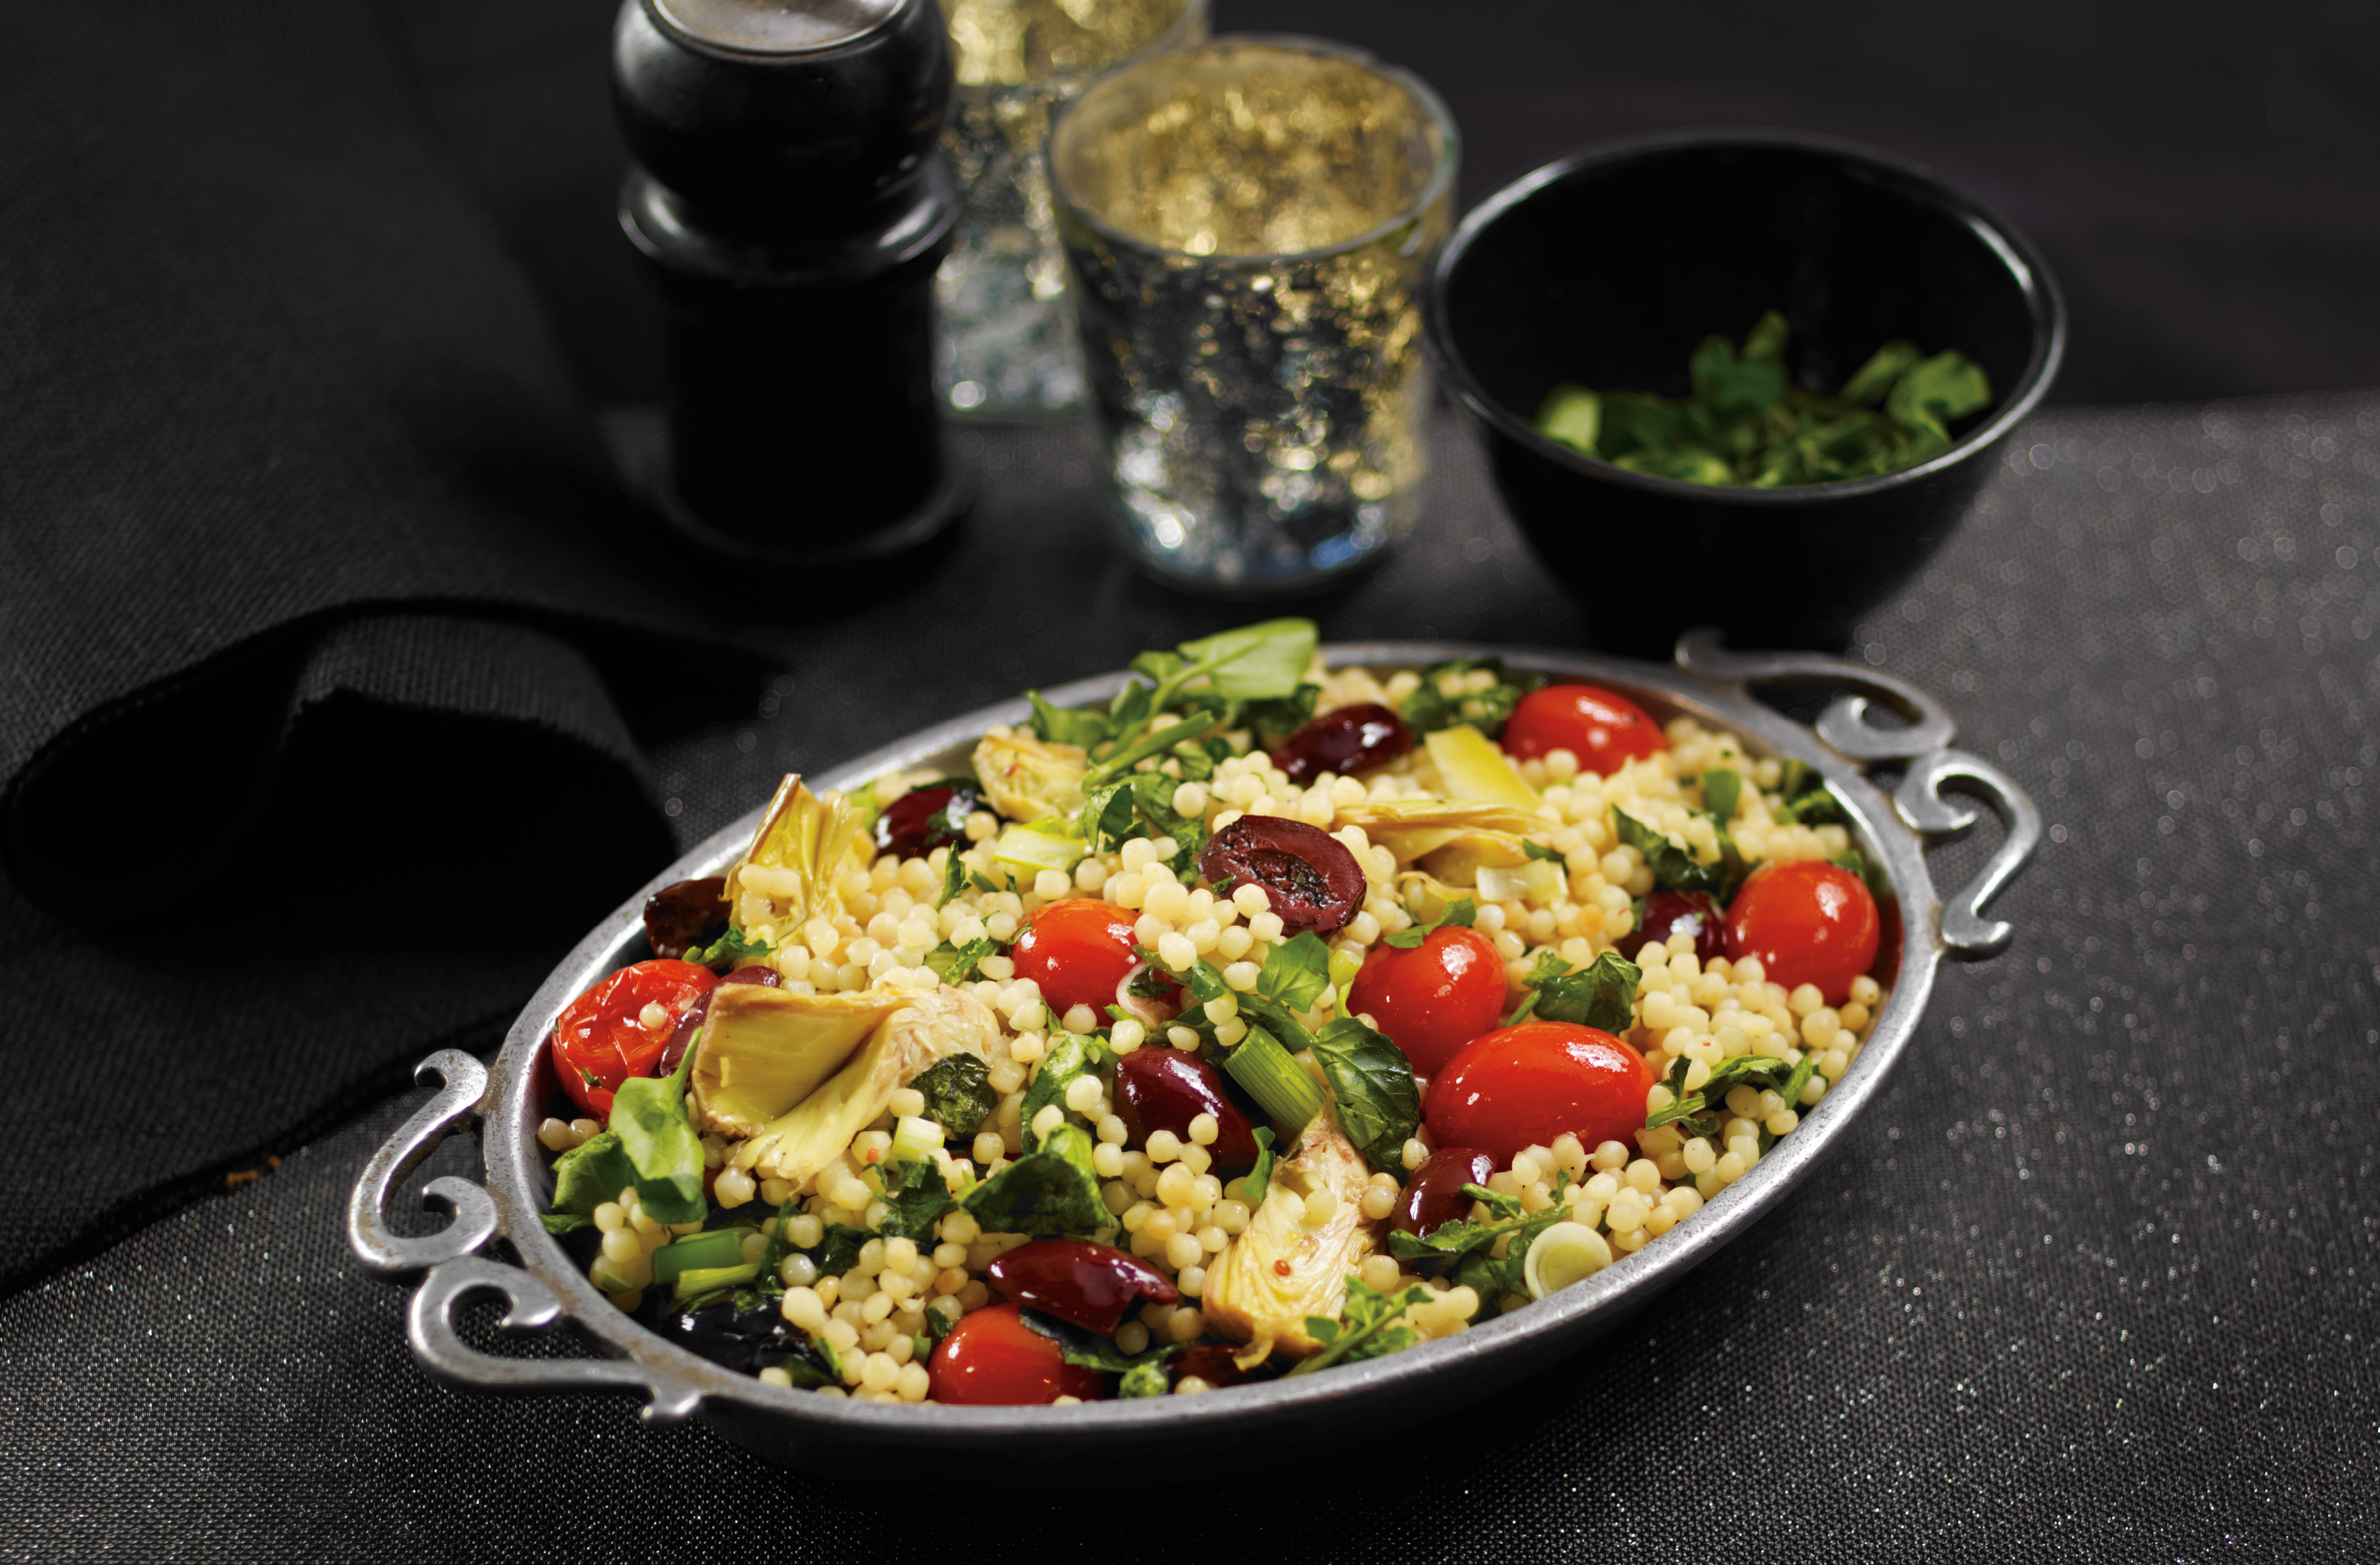 Couscous with  tomatoes, black olives, chopped artichoke hearts, watercress
